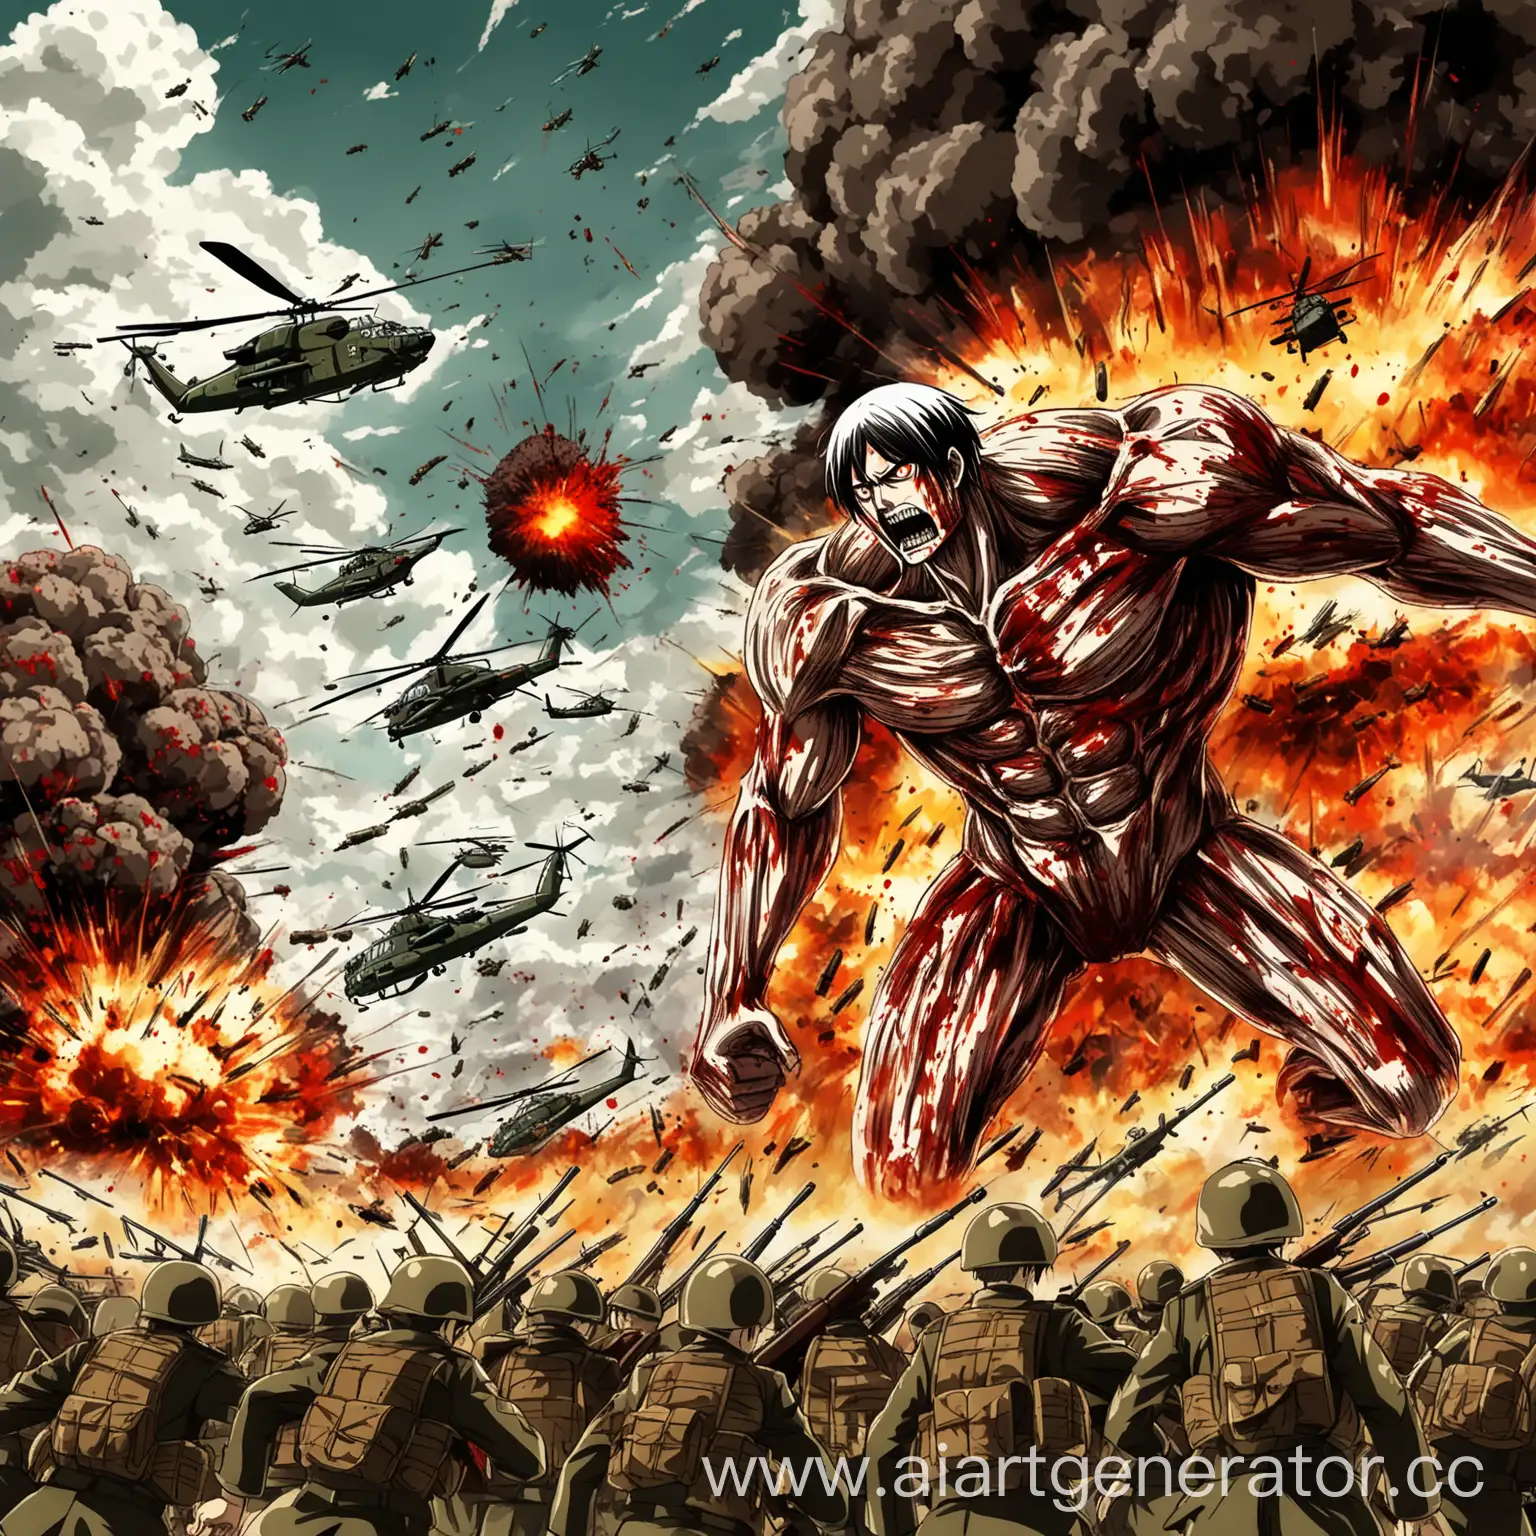 Eren-Yeager-Battles-Ukrainian-Troops-Amid-Explosions-and-Blood-Anime-Style-Art